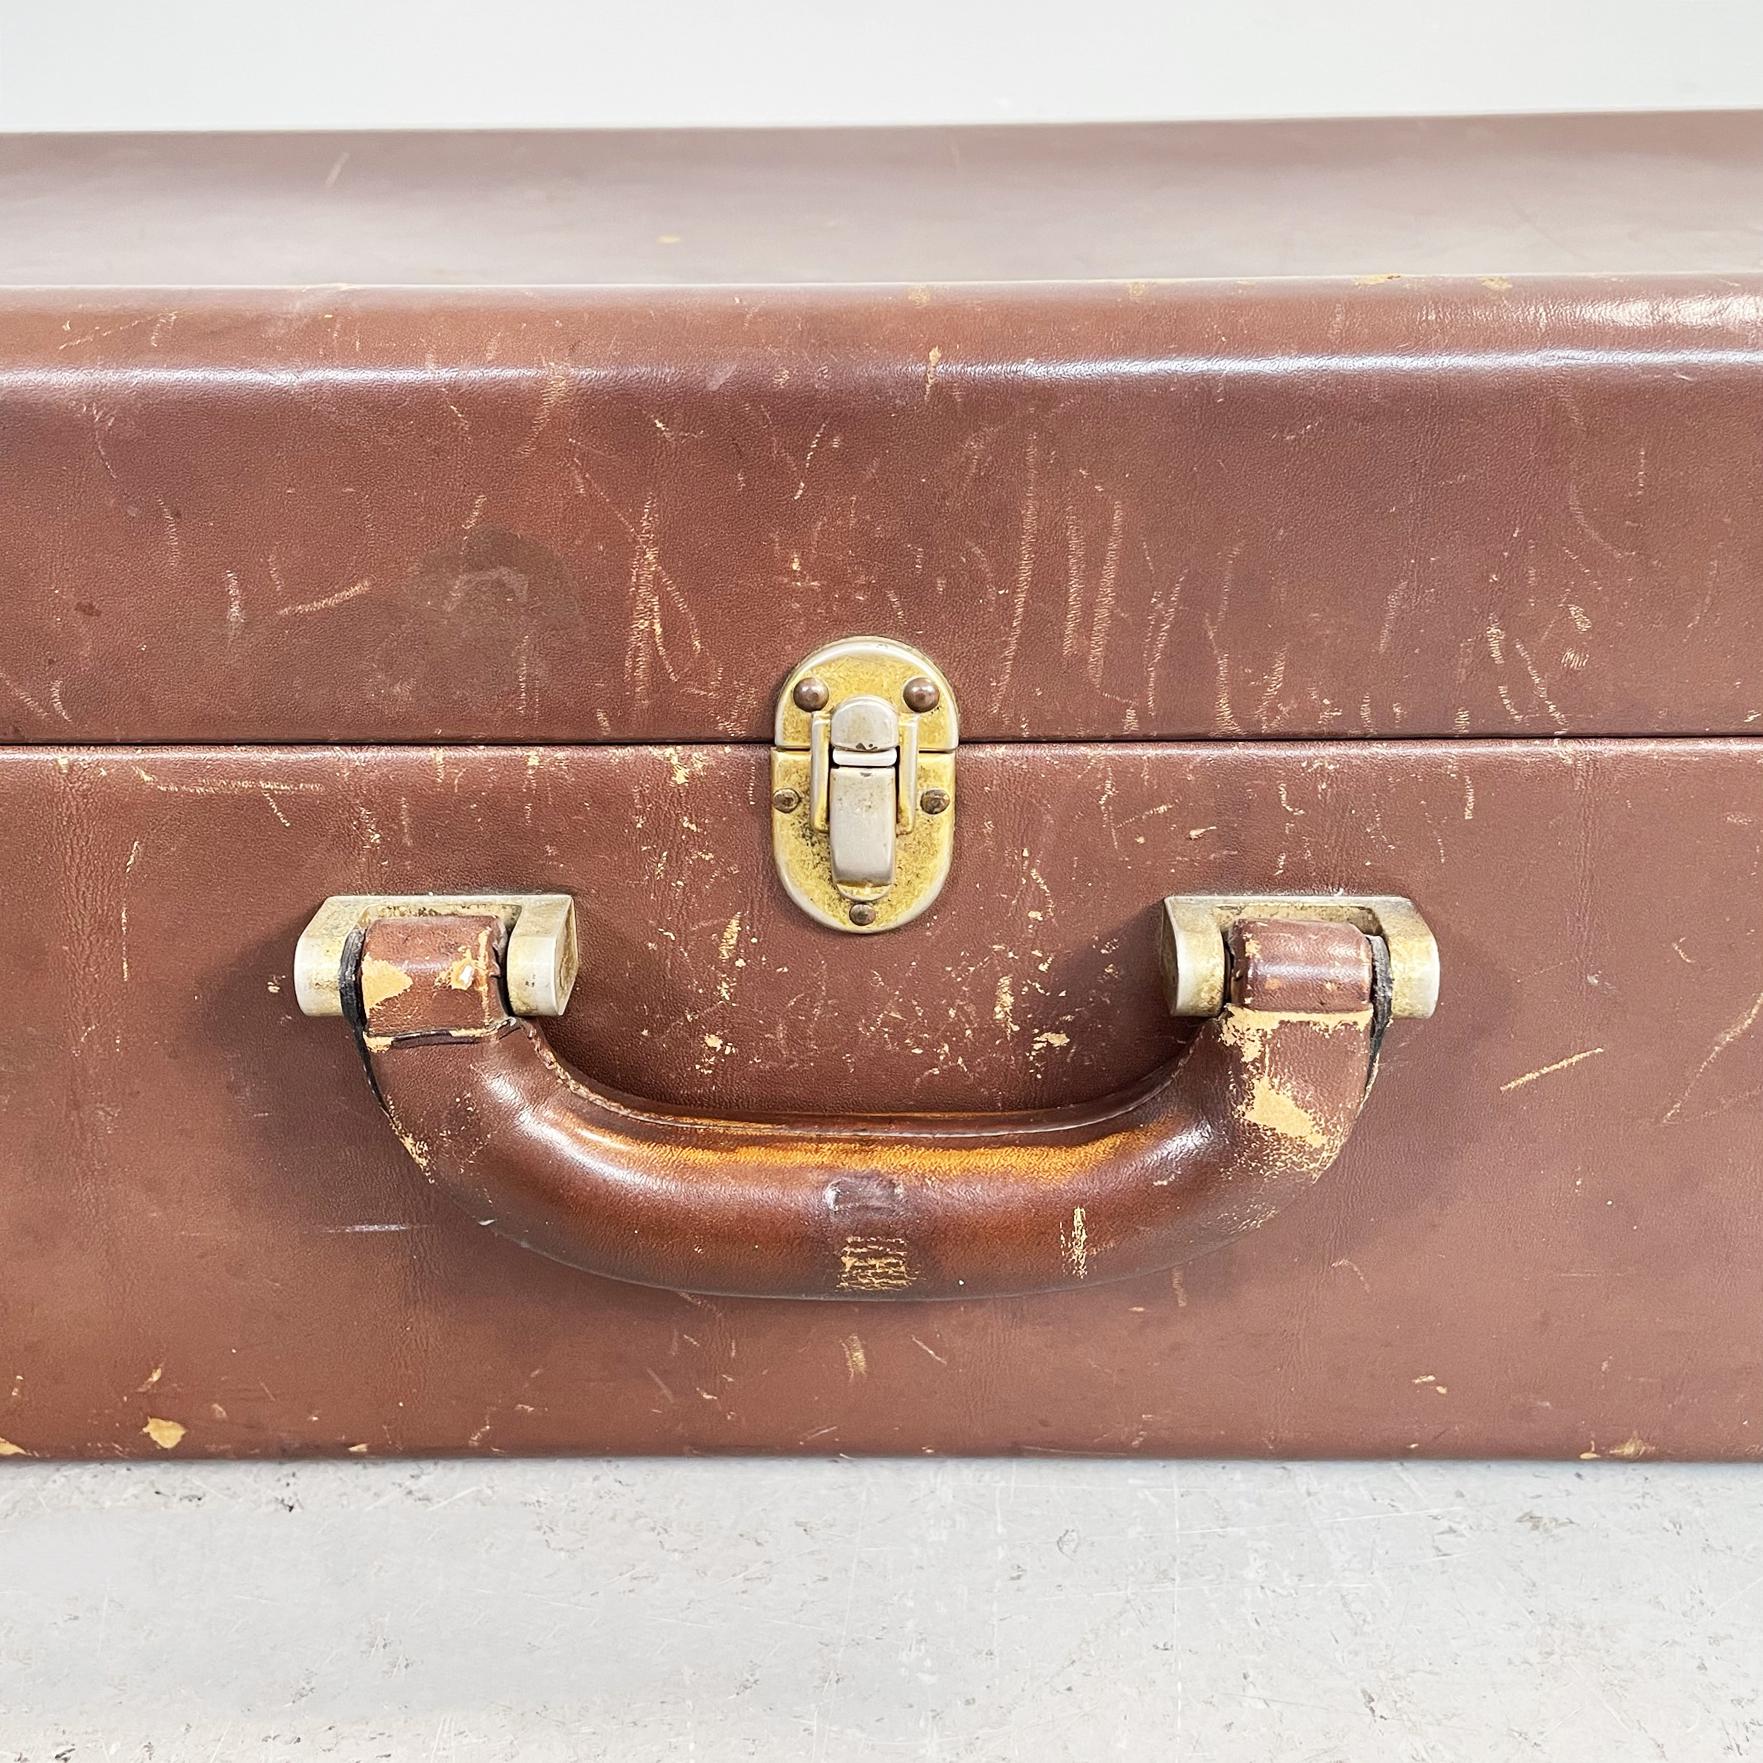 Italian Mid-Century Modern Luggage in Brown Leather with Beige Fabric, 1970s For Sale 4